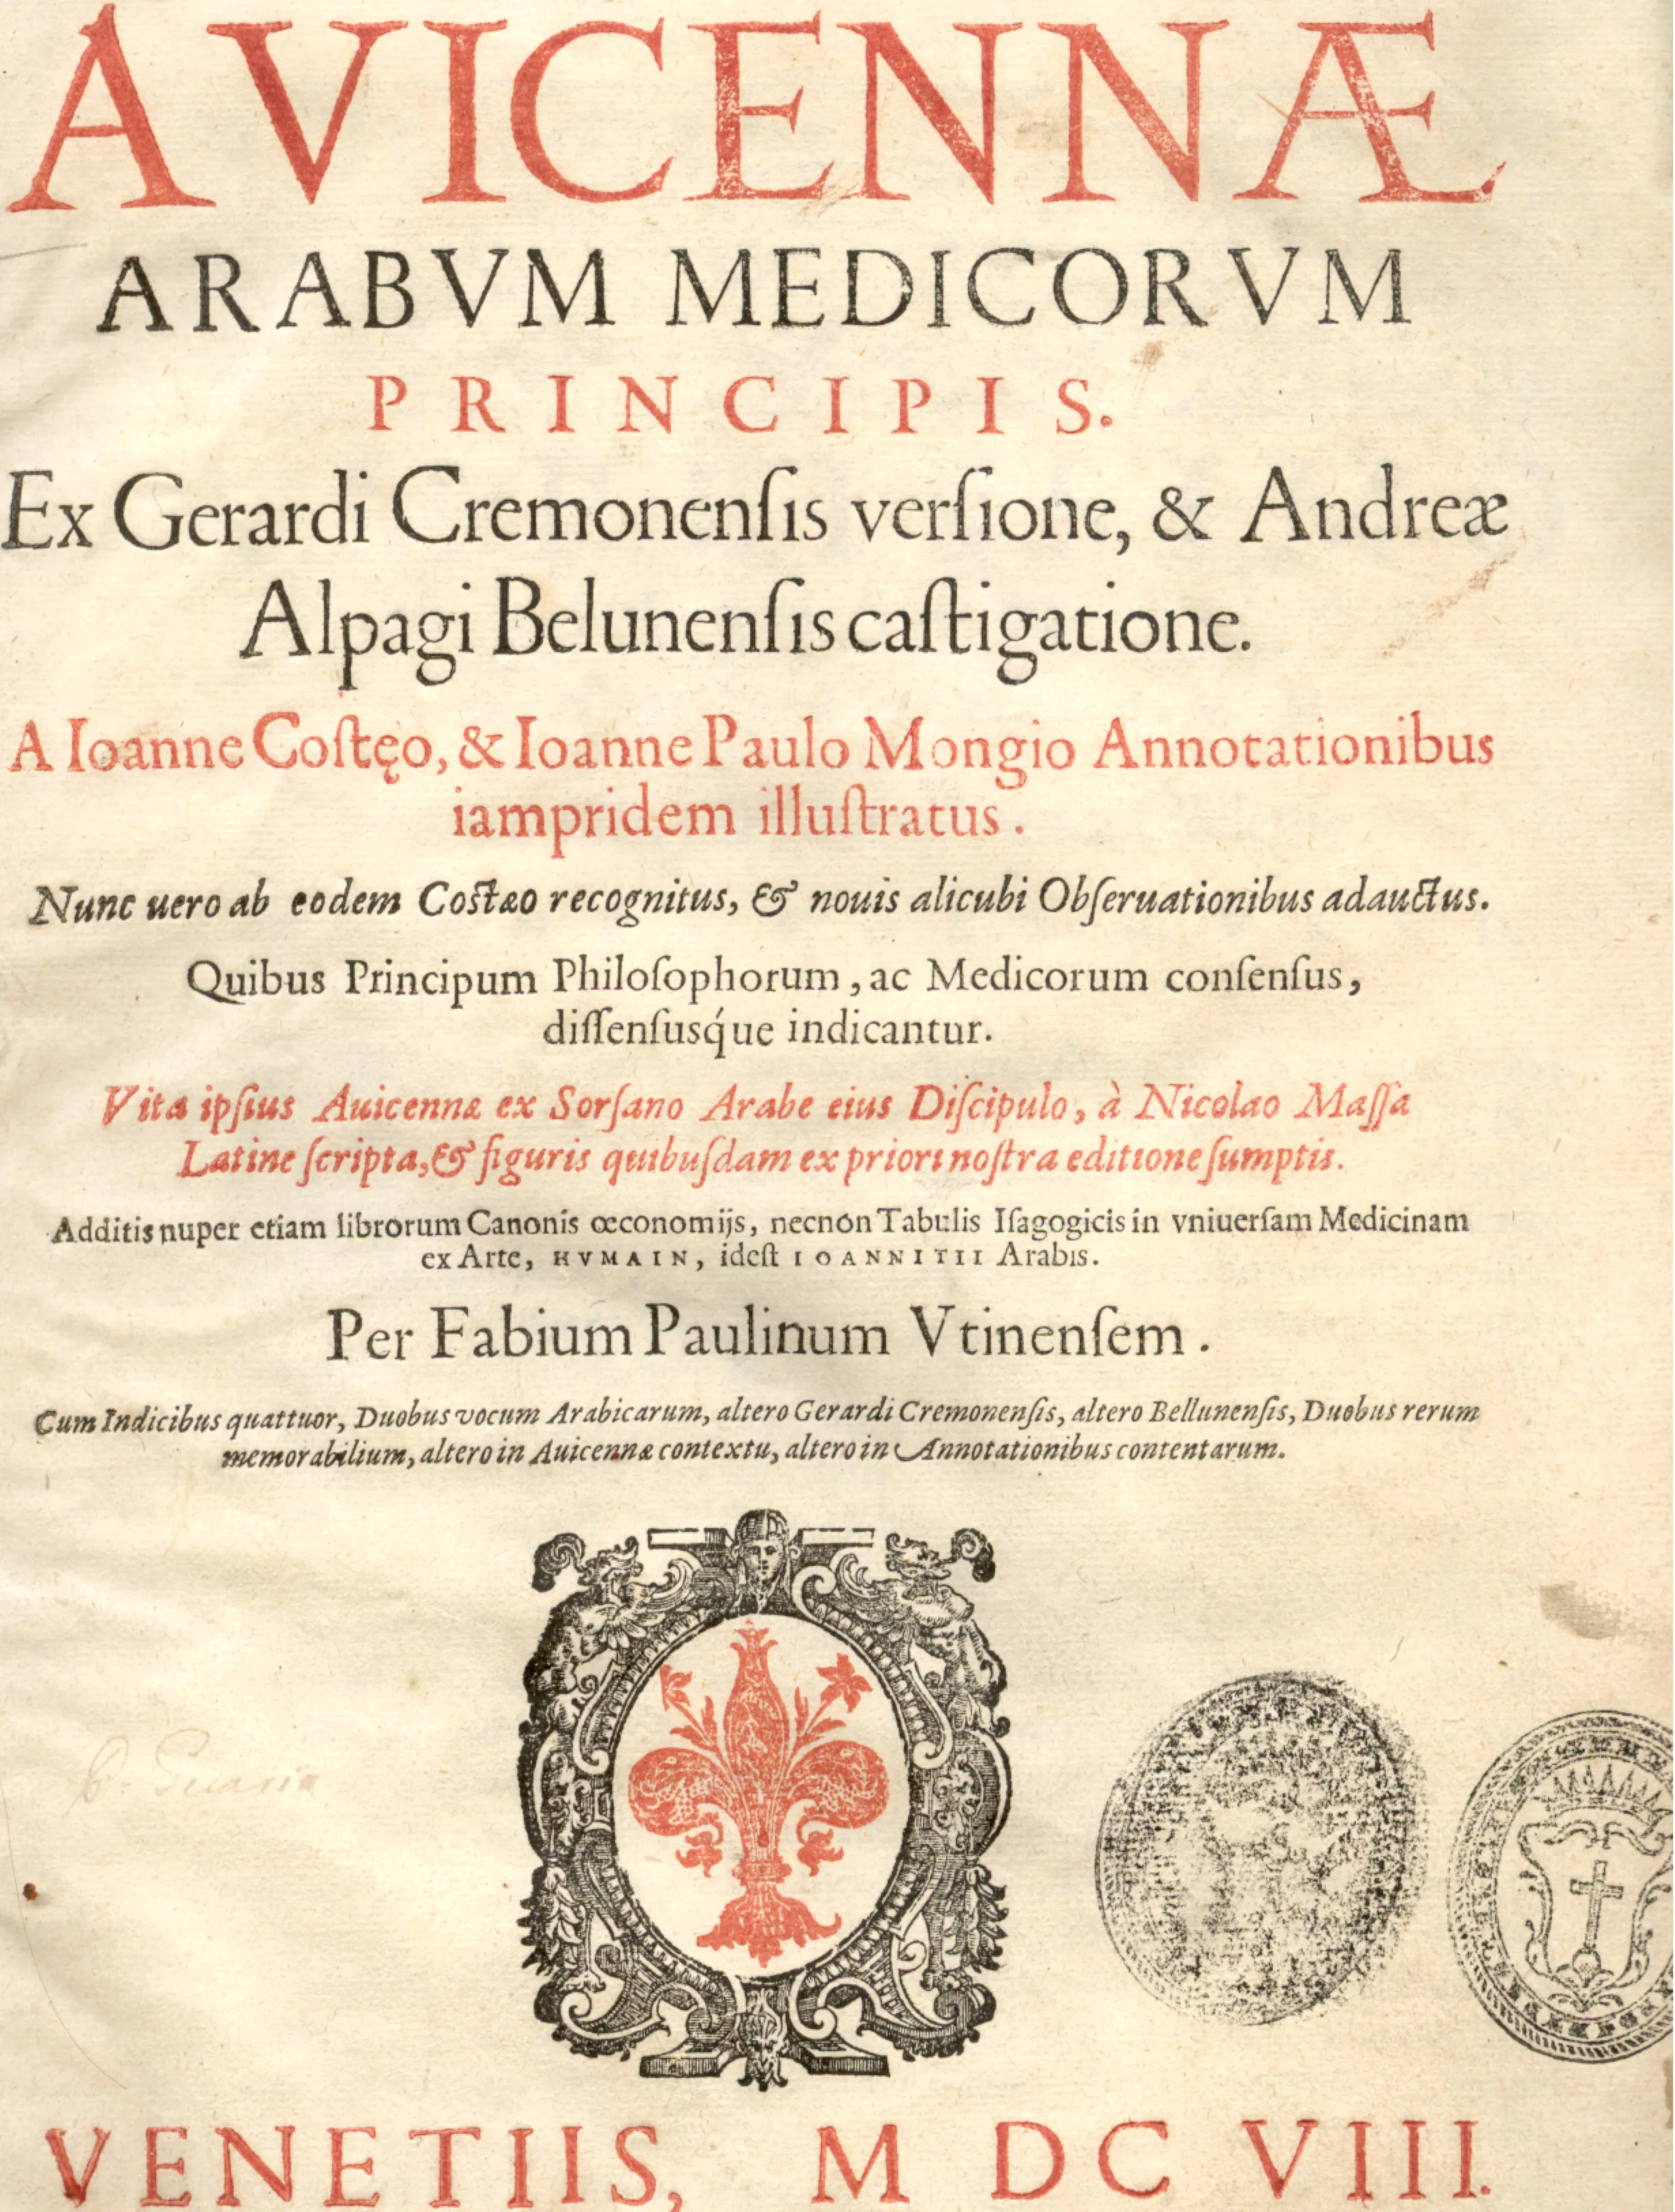 Avicenna, Canon of Medicine (1496), from the Thompson Library